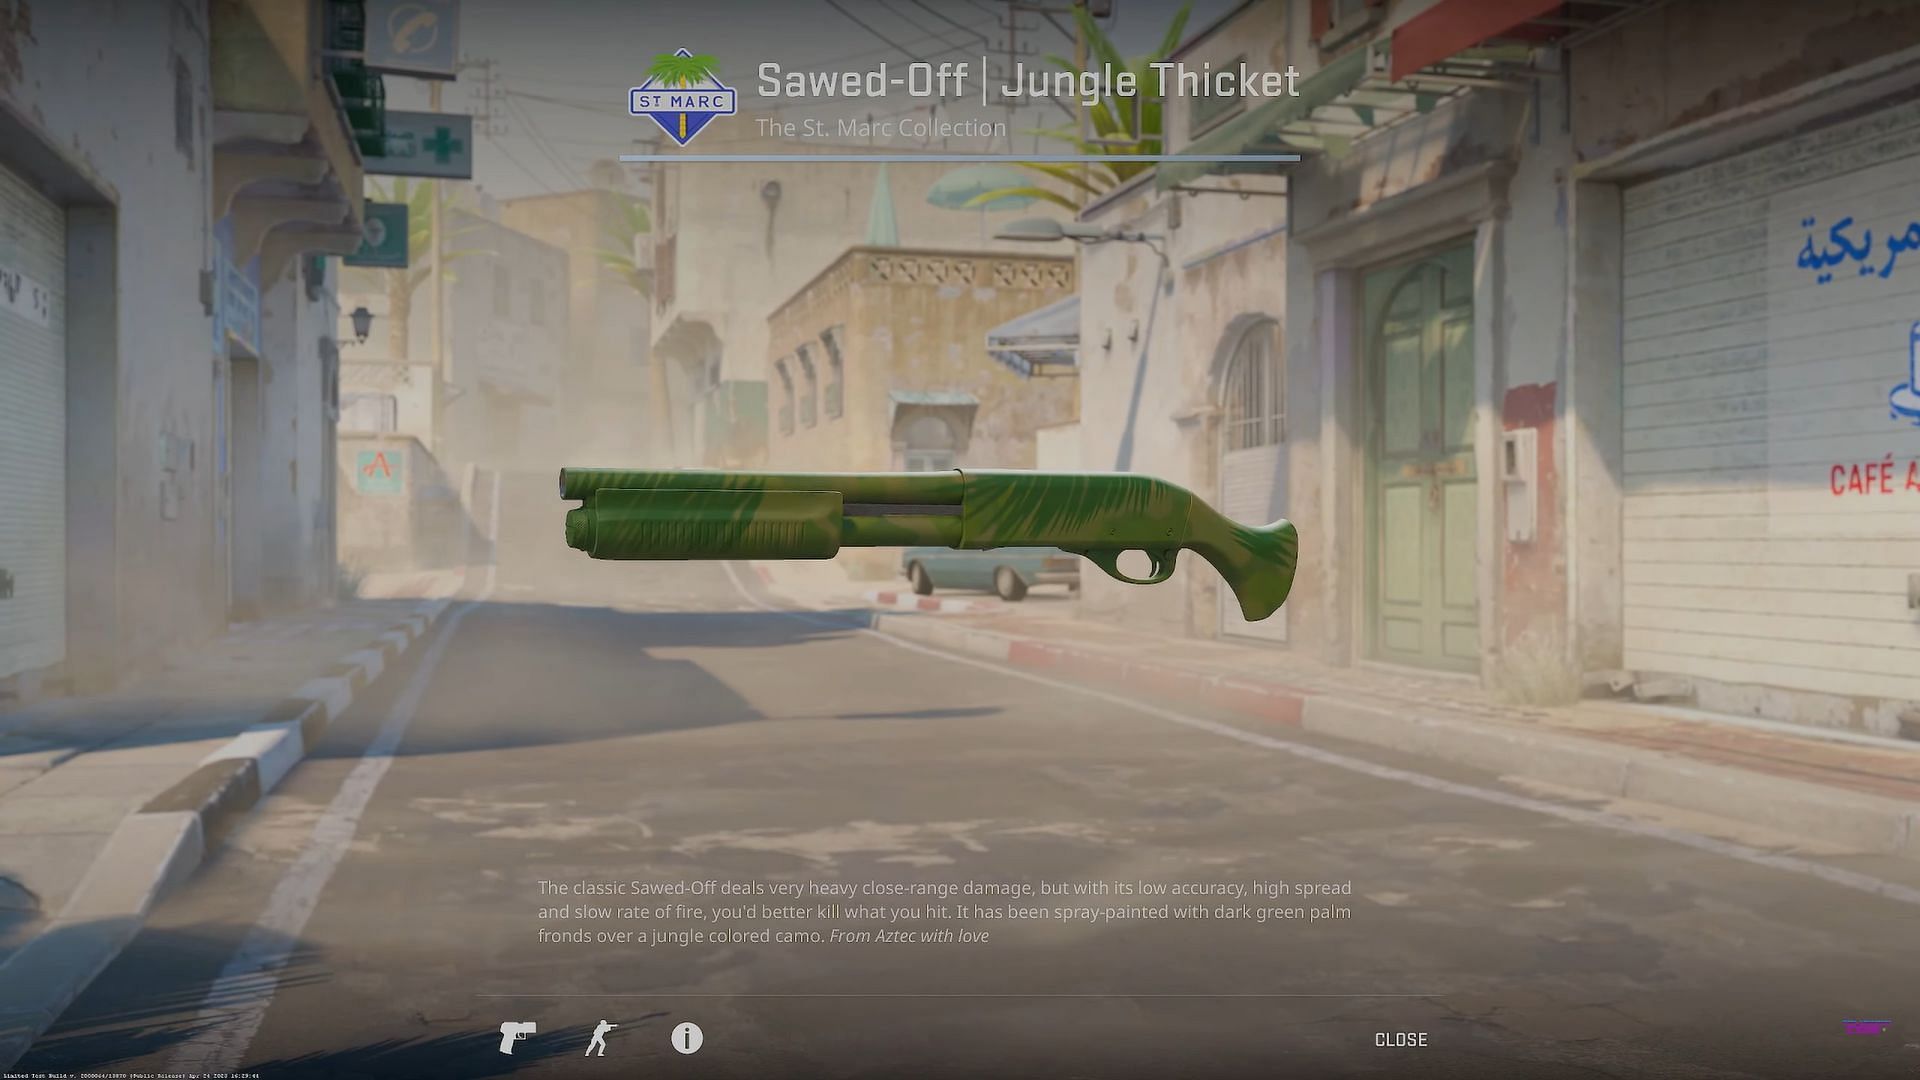 Sawed-Off Jungle Thicket (Image via Valve || YouTube/covernant)